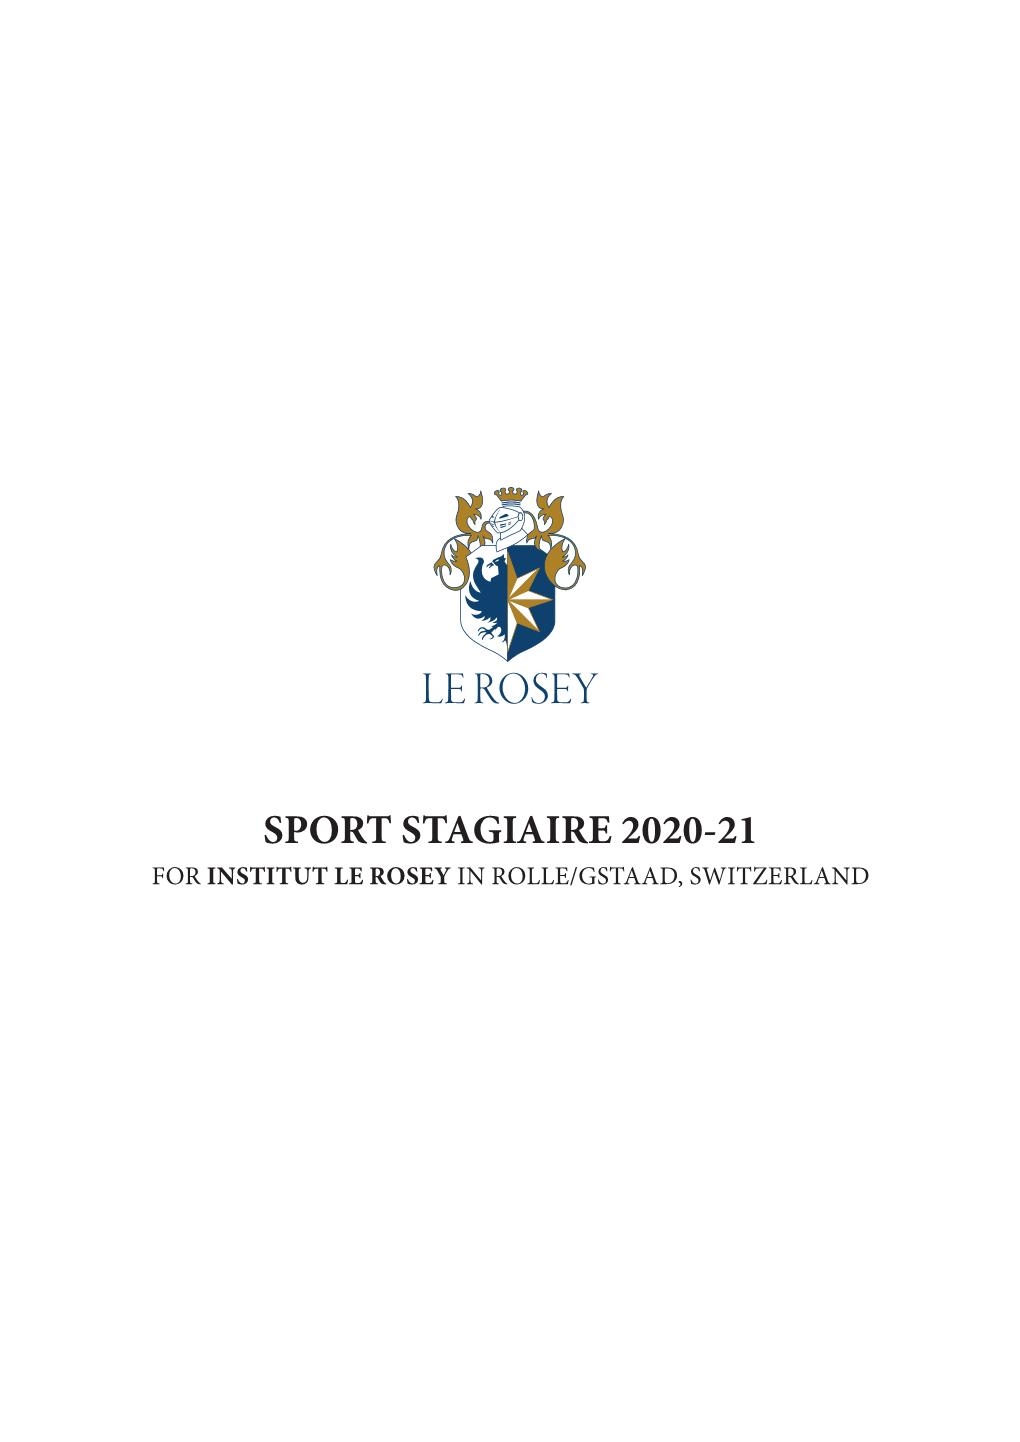 Sport Stagiaire 2020-21 for Institut Le Rosey in Rolle/Gstaad, Switzerland